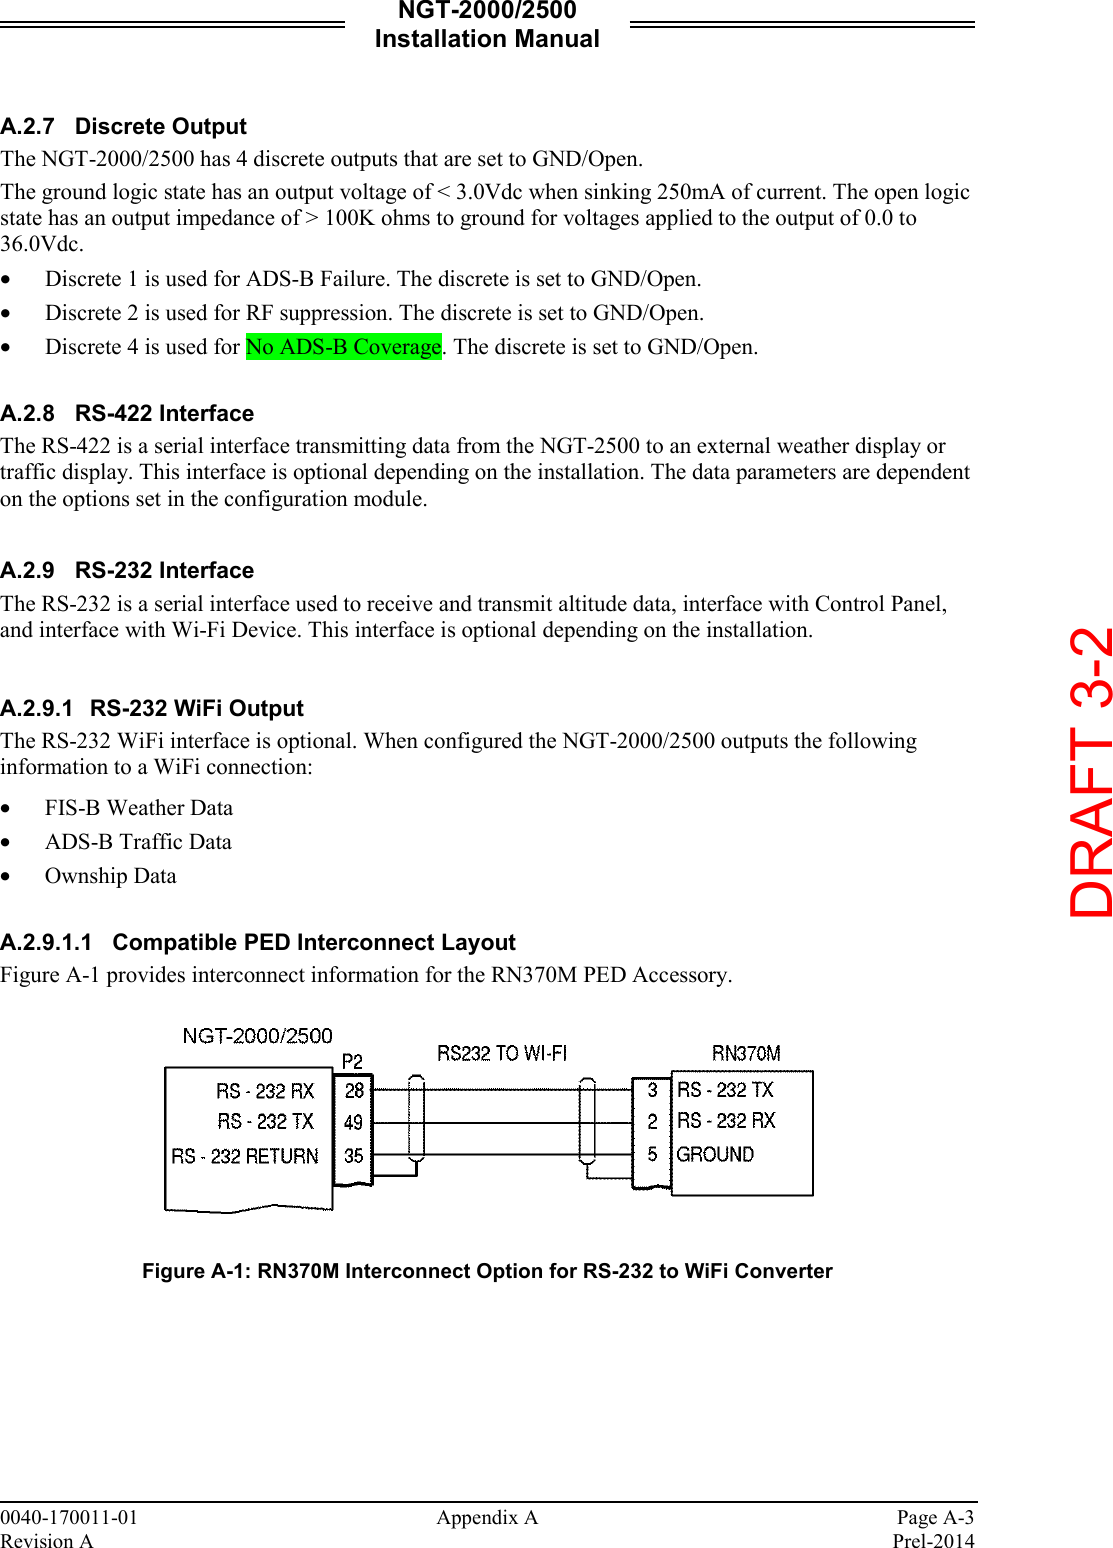 NGT-2000/2500 Installation Manual  0040-170011-01    Appendix A  Page A-3 Revision A    Prel-2014  A.2.7 Discrete Output The NGT-2000/2500 has 4 discrete outputs that are set to GND/Open.  The ground logic state has an output voltage of &lt; 3.0Vdc when sinking 250mA of current. The open logic state has an output impedance of &gt; 100K ohms to ground for voltages applied to the output of 0.0 to 36.0Vdc.  • Discrete 1 is used for ADS-B Failure. The discrete is set to GND/Open.   • Discrete 2 is used for RF suppression. The discrete is set to GND/Open. • Discrete 4 is used for No ADS-B Coverage. The discrete is set to GND/Open.  A.2.8 RS-422 Interface The RS-422 is a serial interface transmitting data from the NGT-2500 to an external weather display or traffic display. This interface is optional depending on the installation. The data parameters are dependent on the options set in the configuration module.   A.2.9 RS-232 Interface The RS-232 is a serial interface used to receive and transmit altitude data, interface with Control Panel, and interface with Wi-Fi Device. This interface is optional depending on the installation.  A.2.9.1 RS-232 WiFi Output  The RS-232 WiFi interface is optional. When configured the NGT-2000/2500 outputs the following information to a WiFi connection:  • FIS-B Weather Data • ADS-B Traffic Data • Ownship Data   A.2.9.1.1 Compatible PED Interconnect Layout Figure A-1 provides interconnect information for the RN370M PED Accessory.     Figure A-1: RN370M Interconnect Option for RS-232 to WiFi Converter      DRAFT 3-2